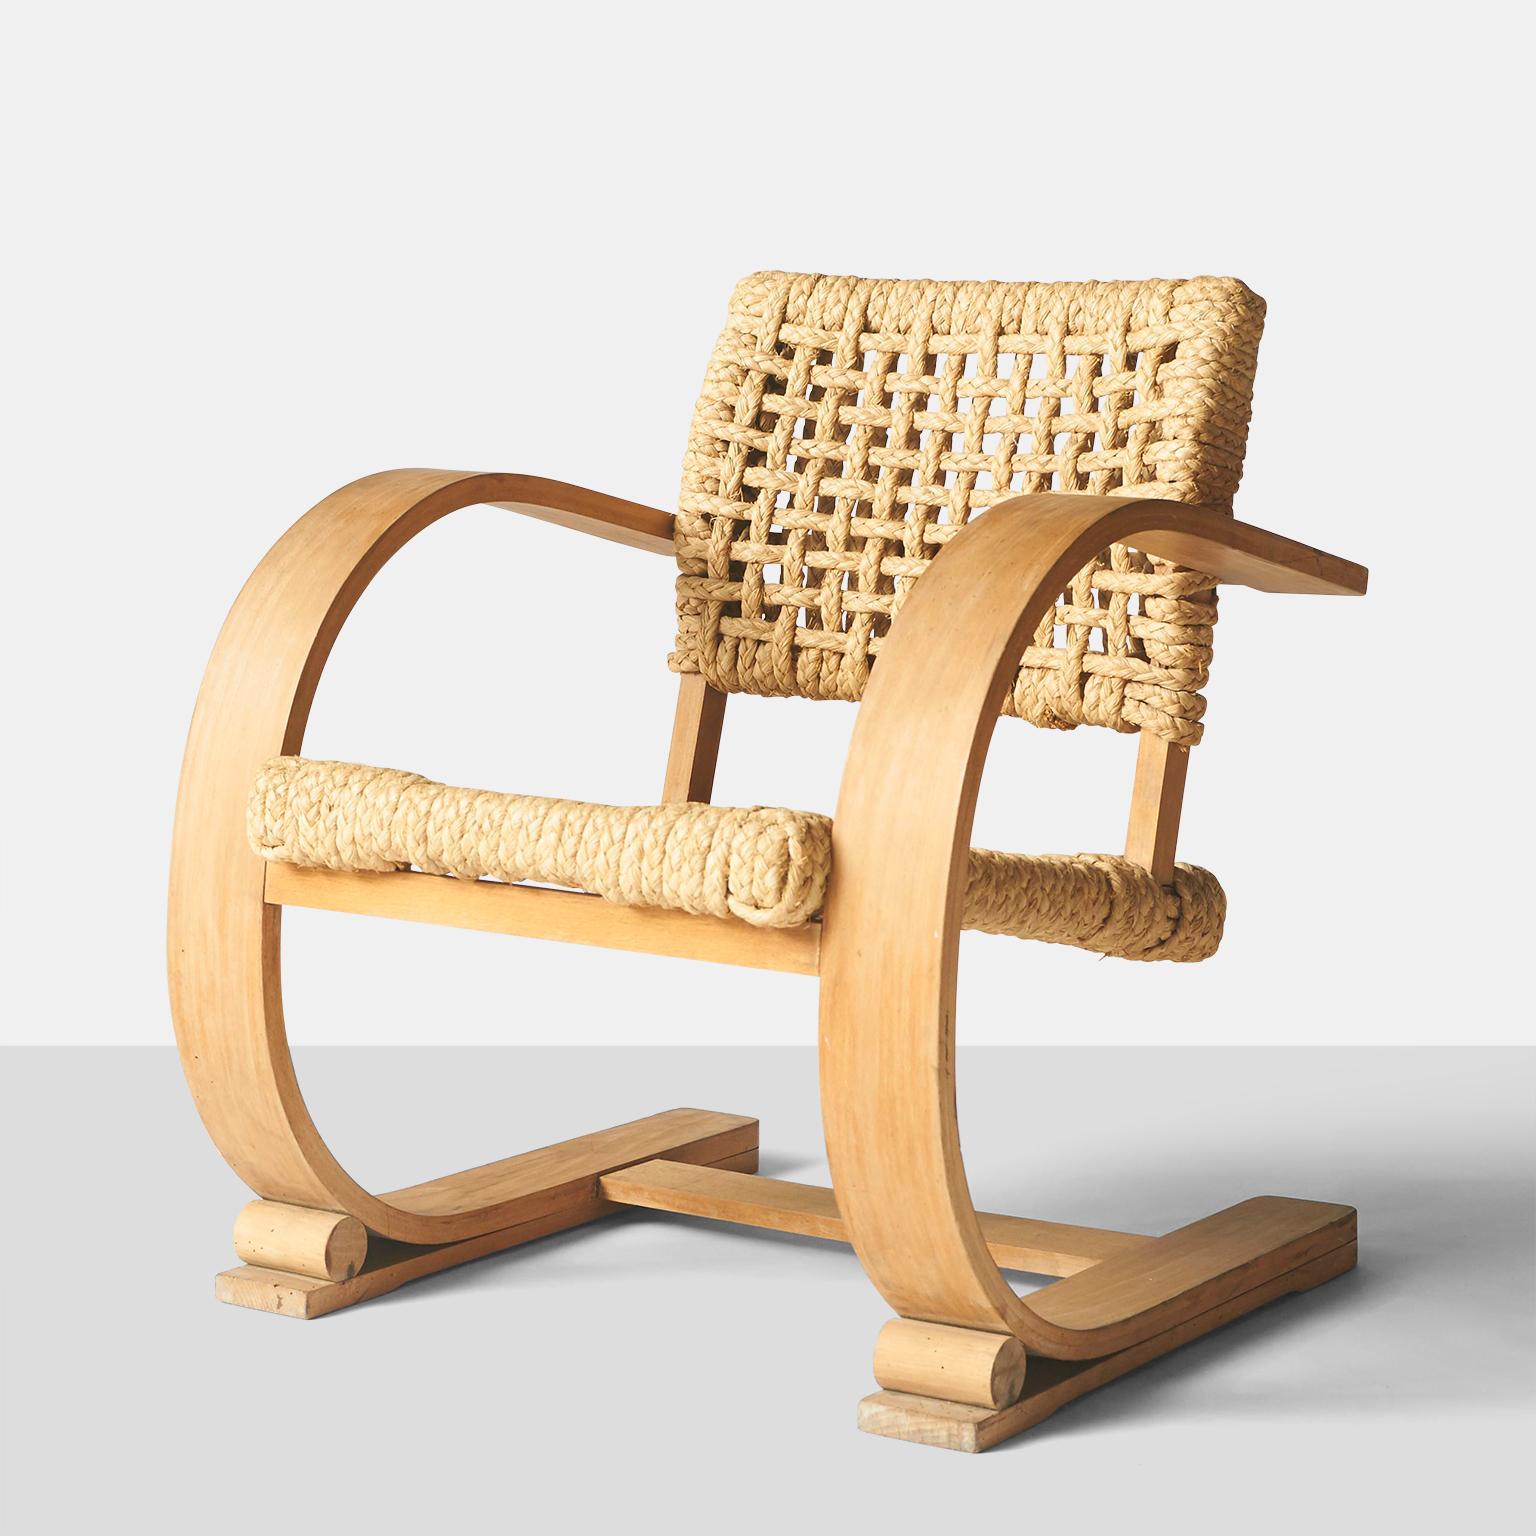 one low slung rope chair by Audoux-Minet featuring bentwood frames with braided rope seat and back rest.